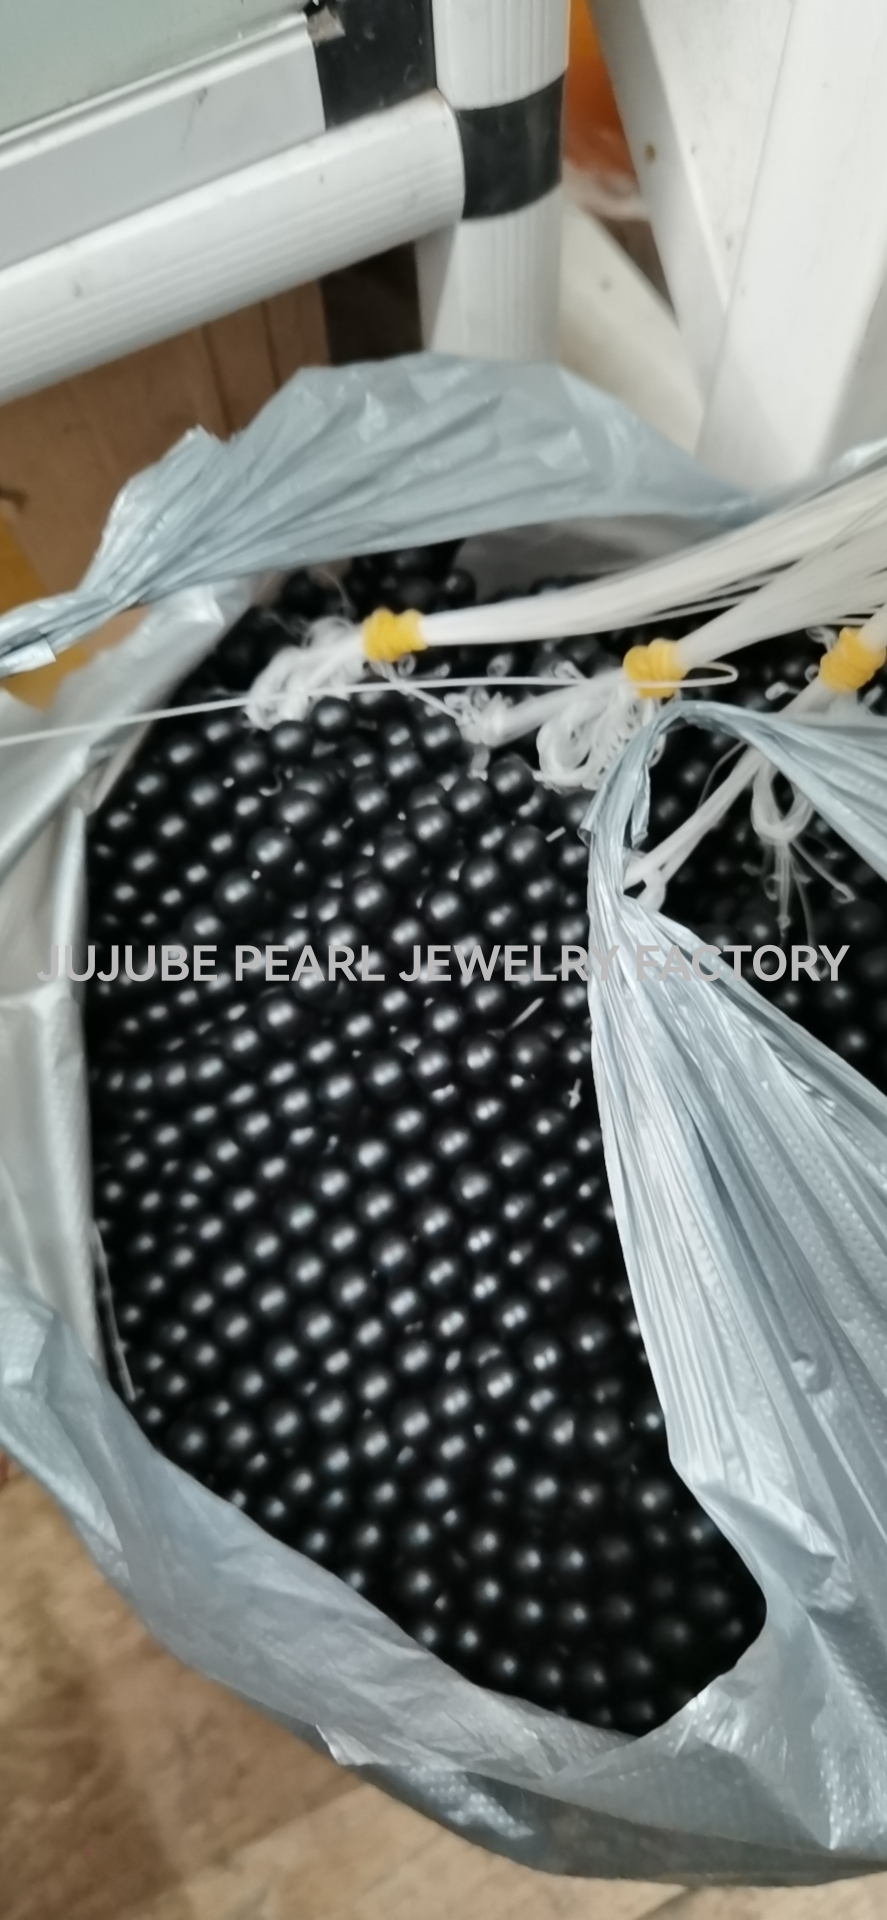 Fine crystal beads glass beads bracelets necklaces door curtains decorative clothing accessories